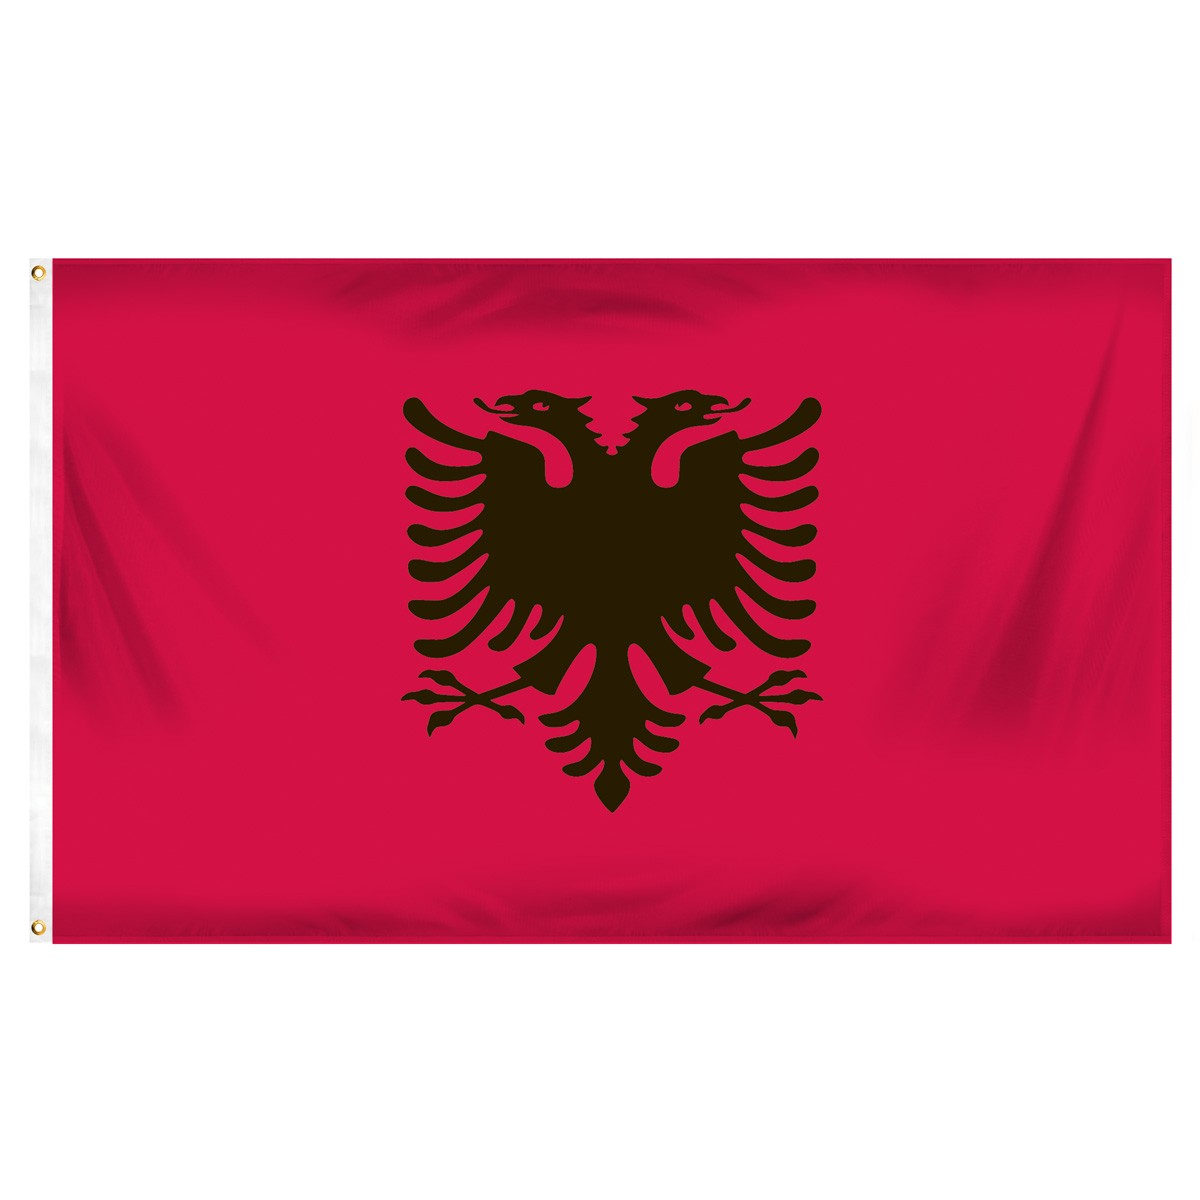 Albania Posters and Banners